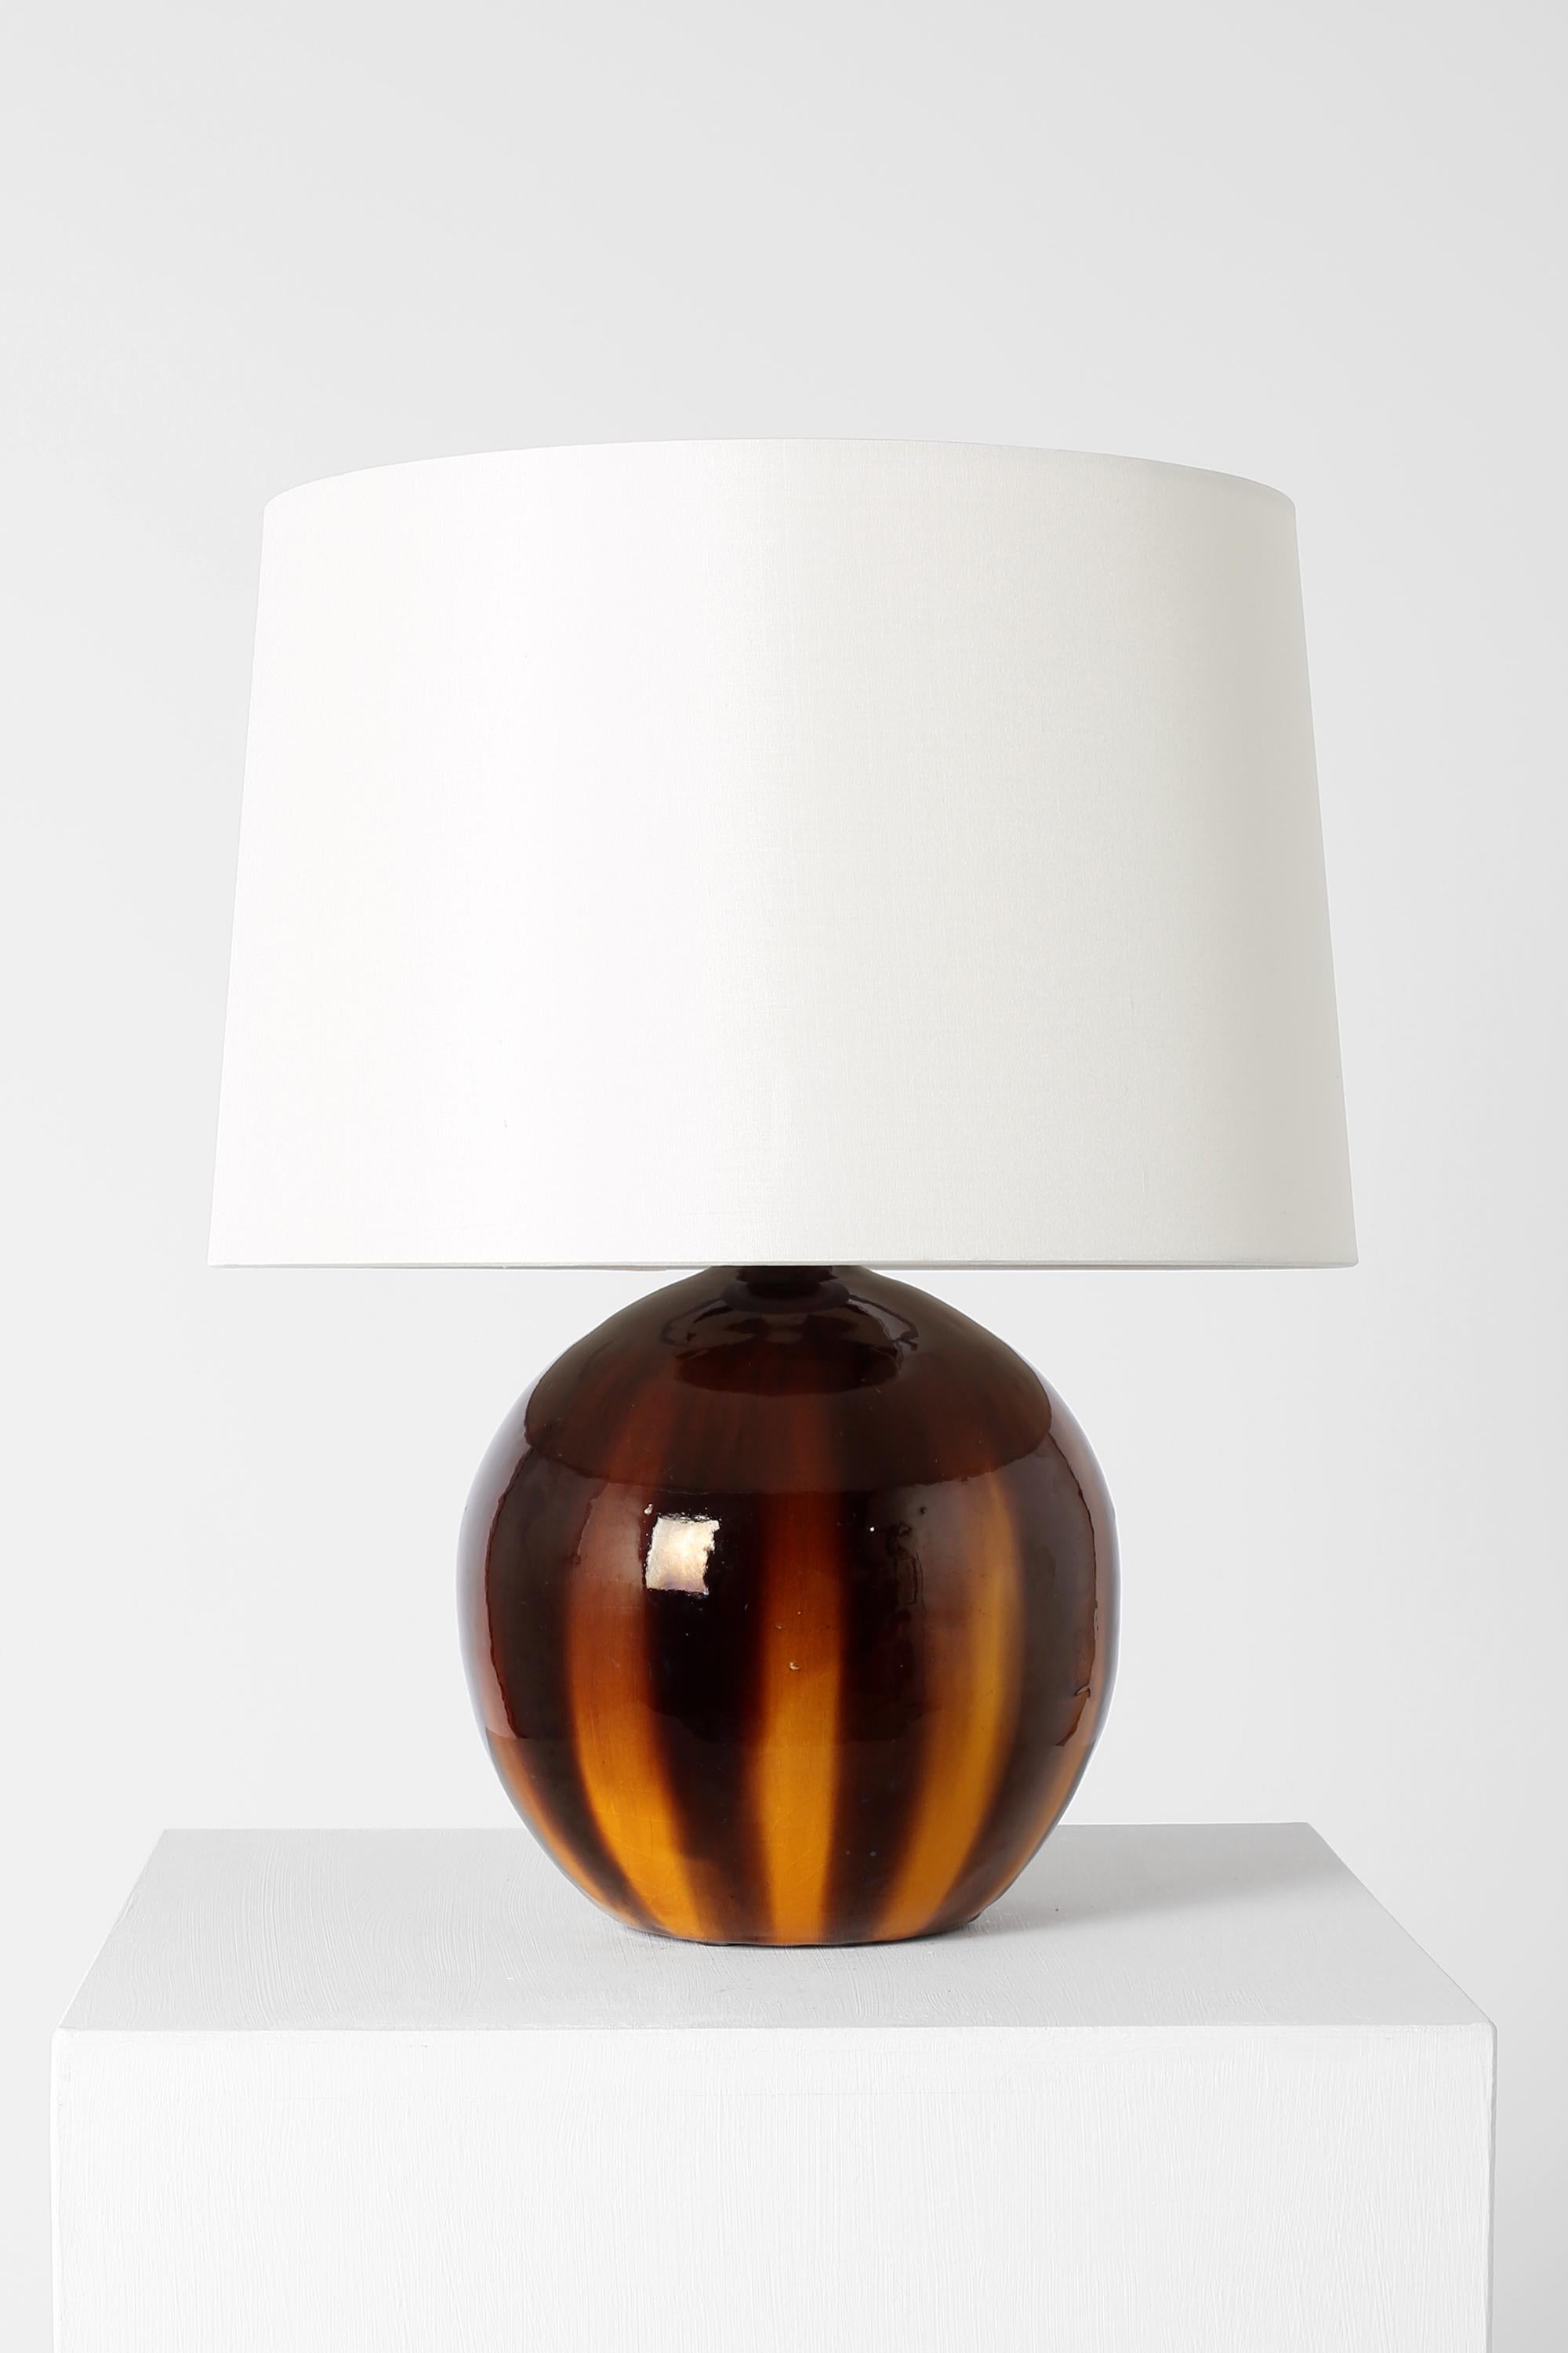 A rare terracotta table lamp of spherical form, with toffee-like ochre and brown crackle glaze by Albert Heilles for his atelier in Albi, signed. French, 1931. Supplied with an off-white dupion silk shade.